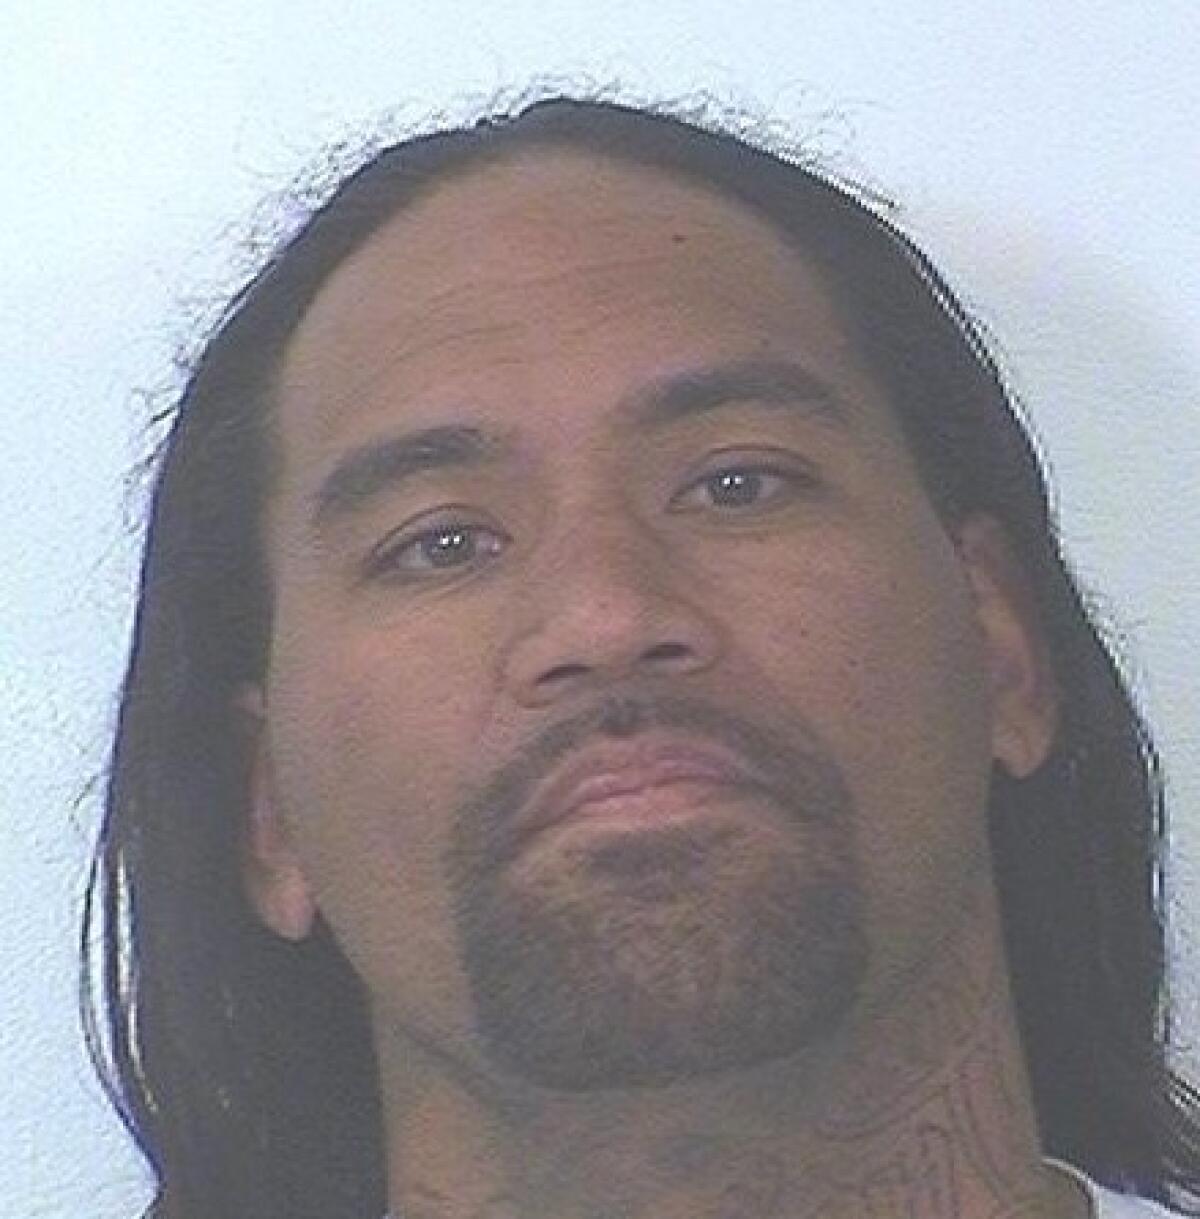 Myles S. Asuega was found dead in his prison cell Friday.